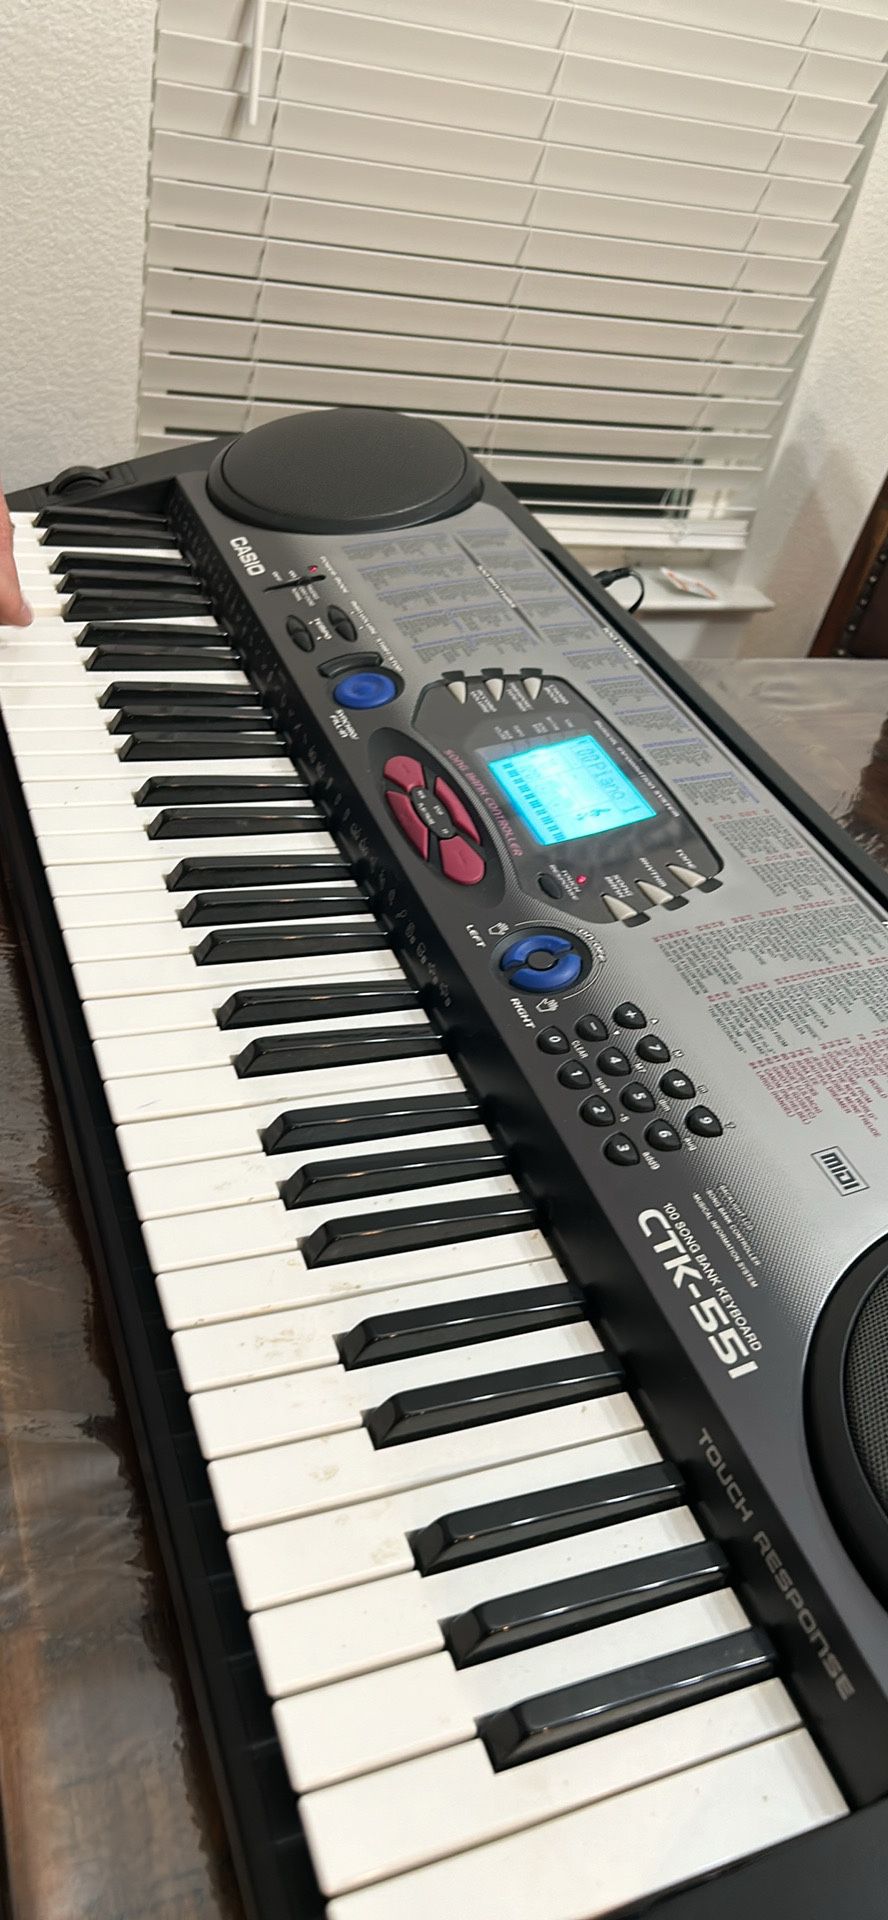 100 KEYBOARD CASIO CKT-551 100 SONG BANK KEYBOARD.with stand $50 OBO